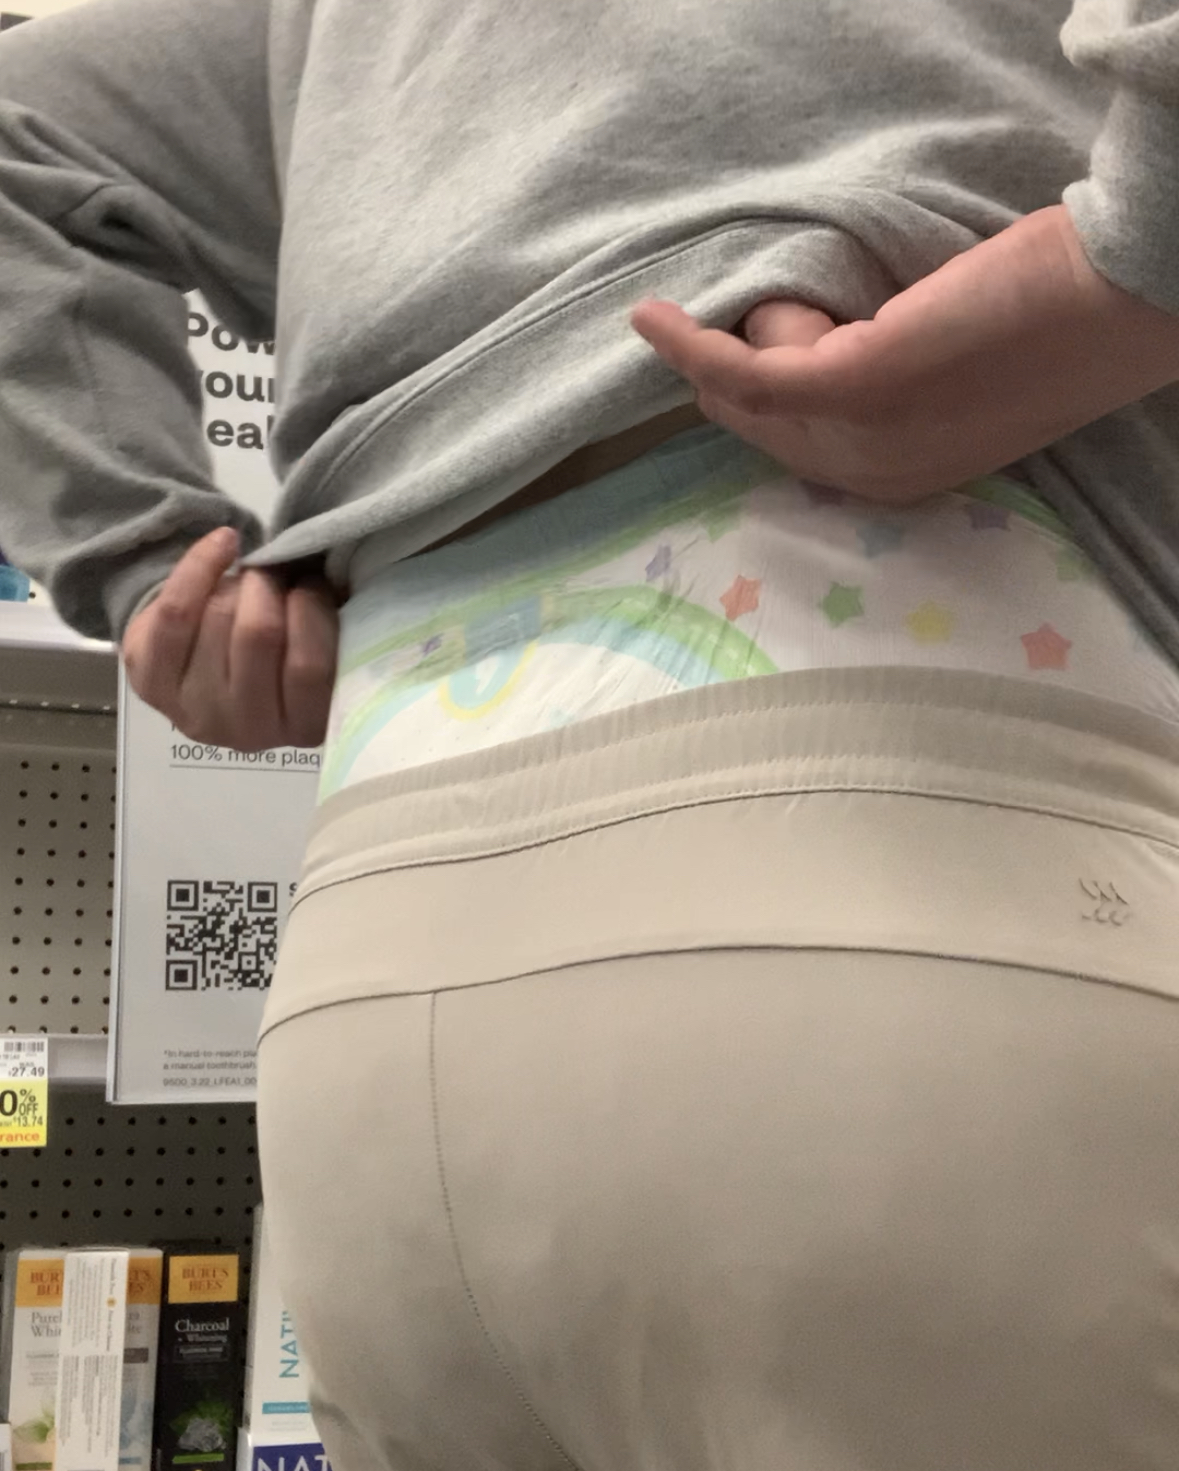 Accident in Diaper While Shopping